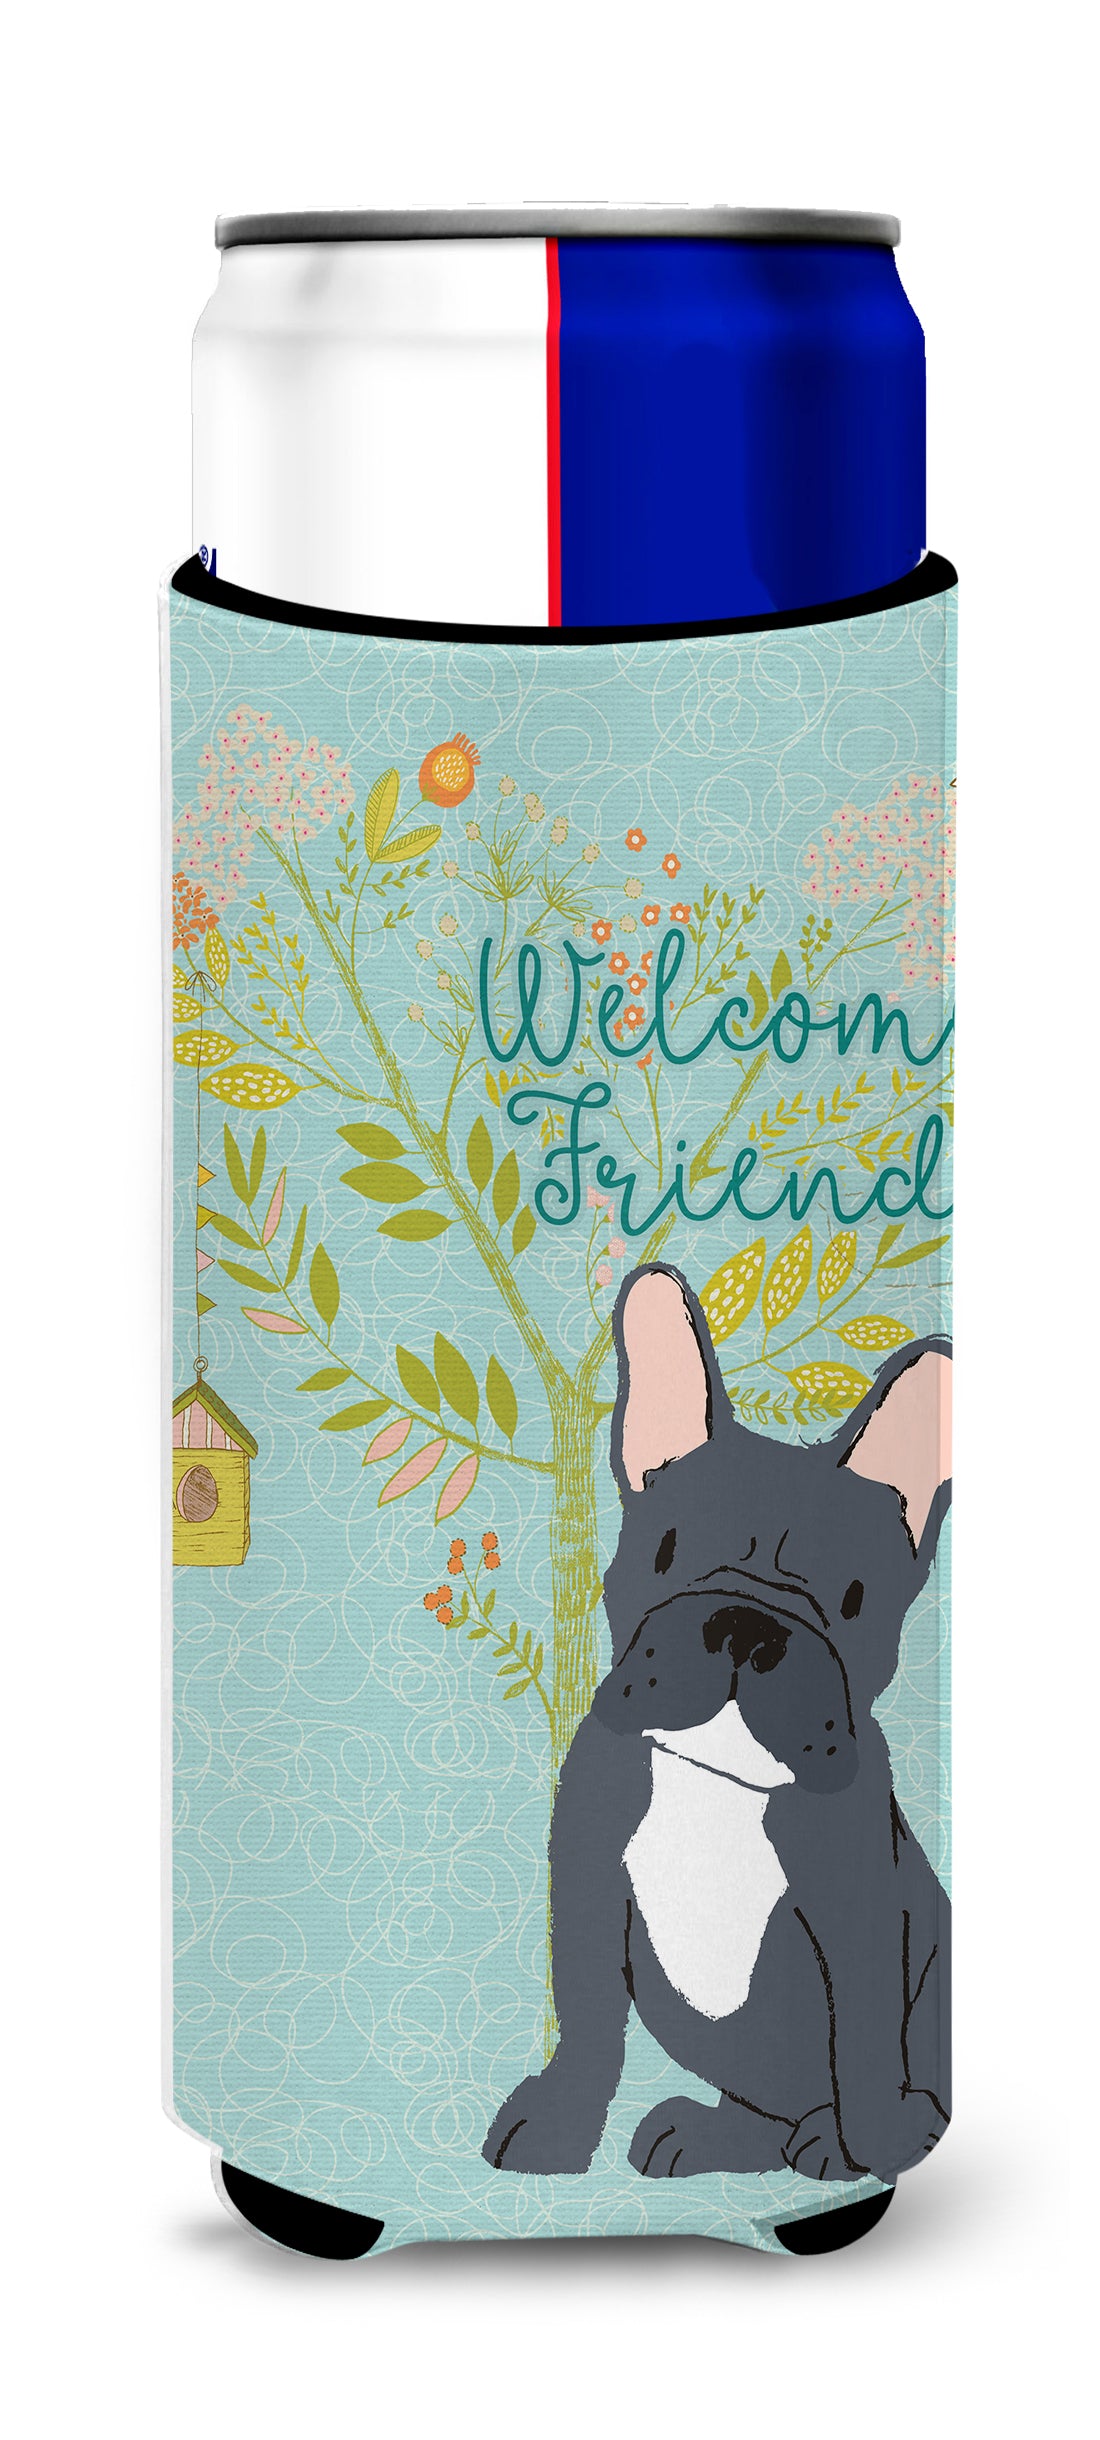 Welcome Friends Black French Bulldog  Ultra Hugger for slim cans BB7632MUK  the-store.com.